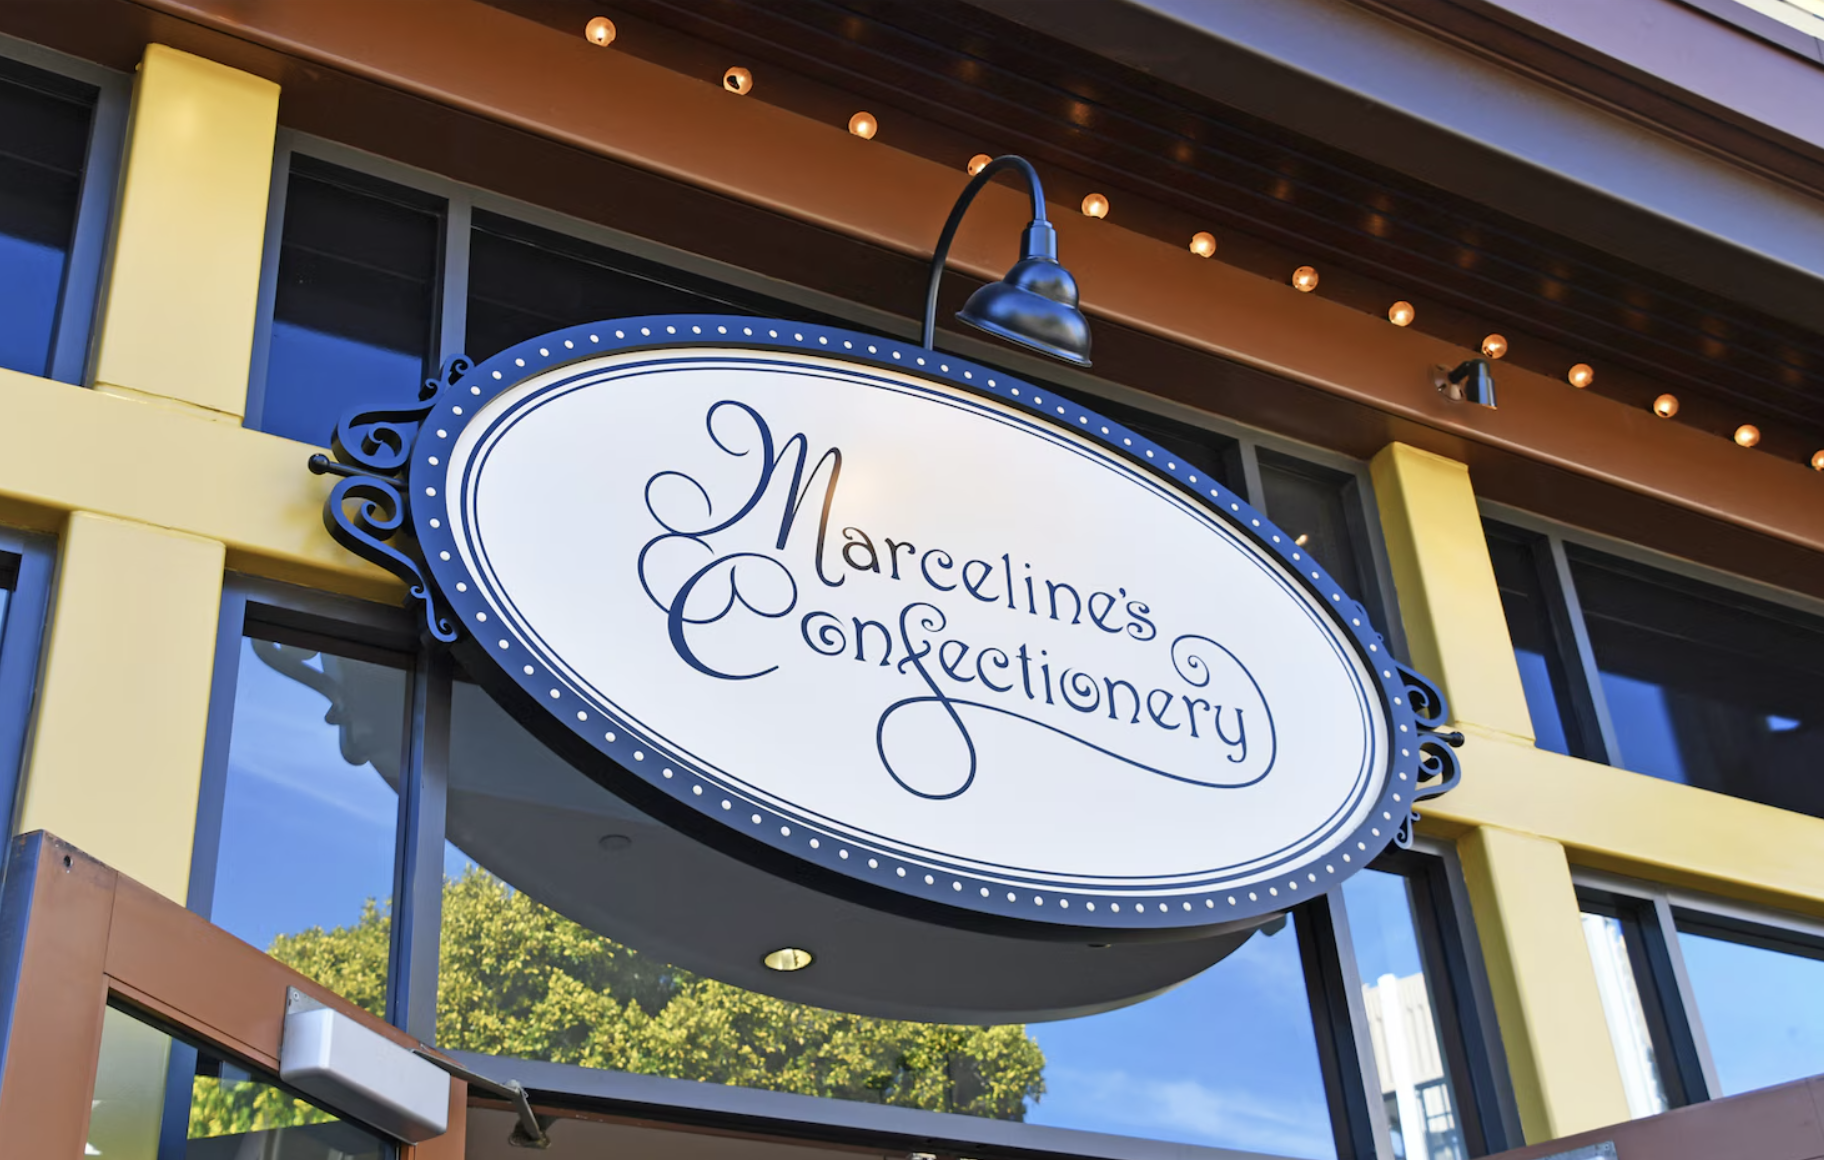 Marceline's Confectionery